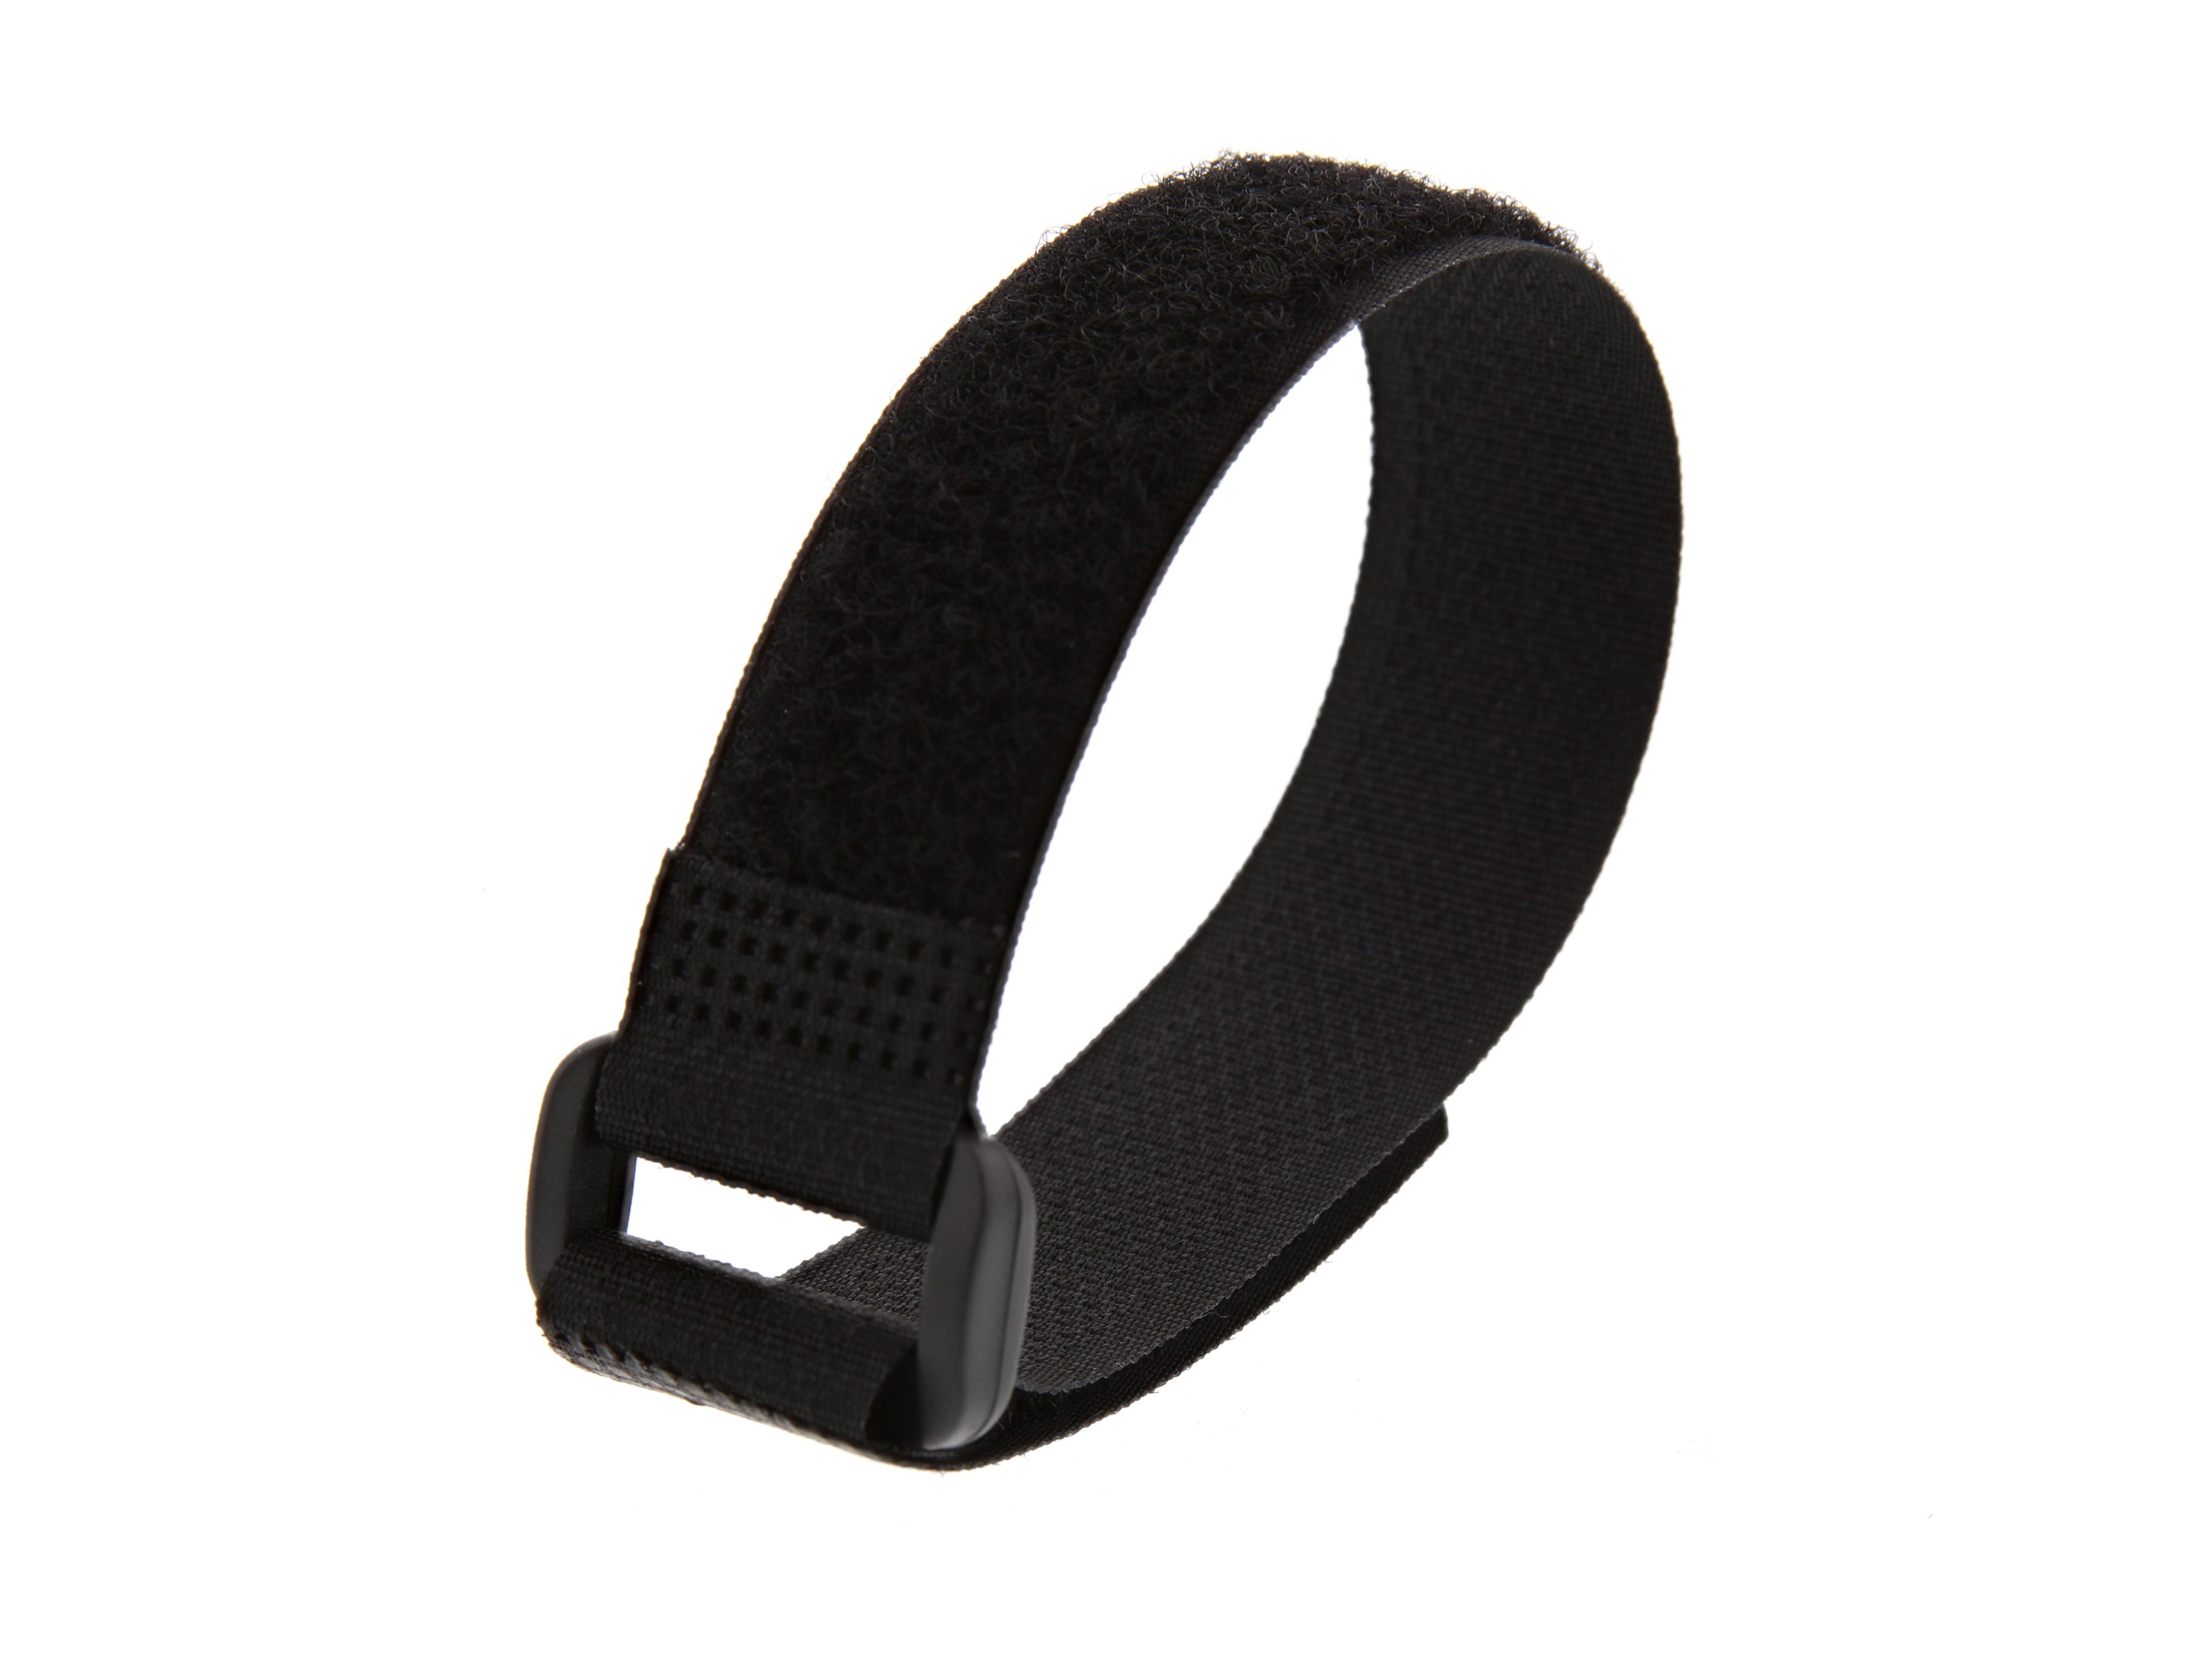 VELCRO BRAND RECLOSABLE CINCH STRAPS,BLACK,PK10 - Hook and Loop